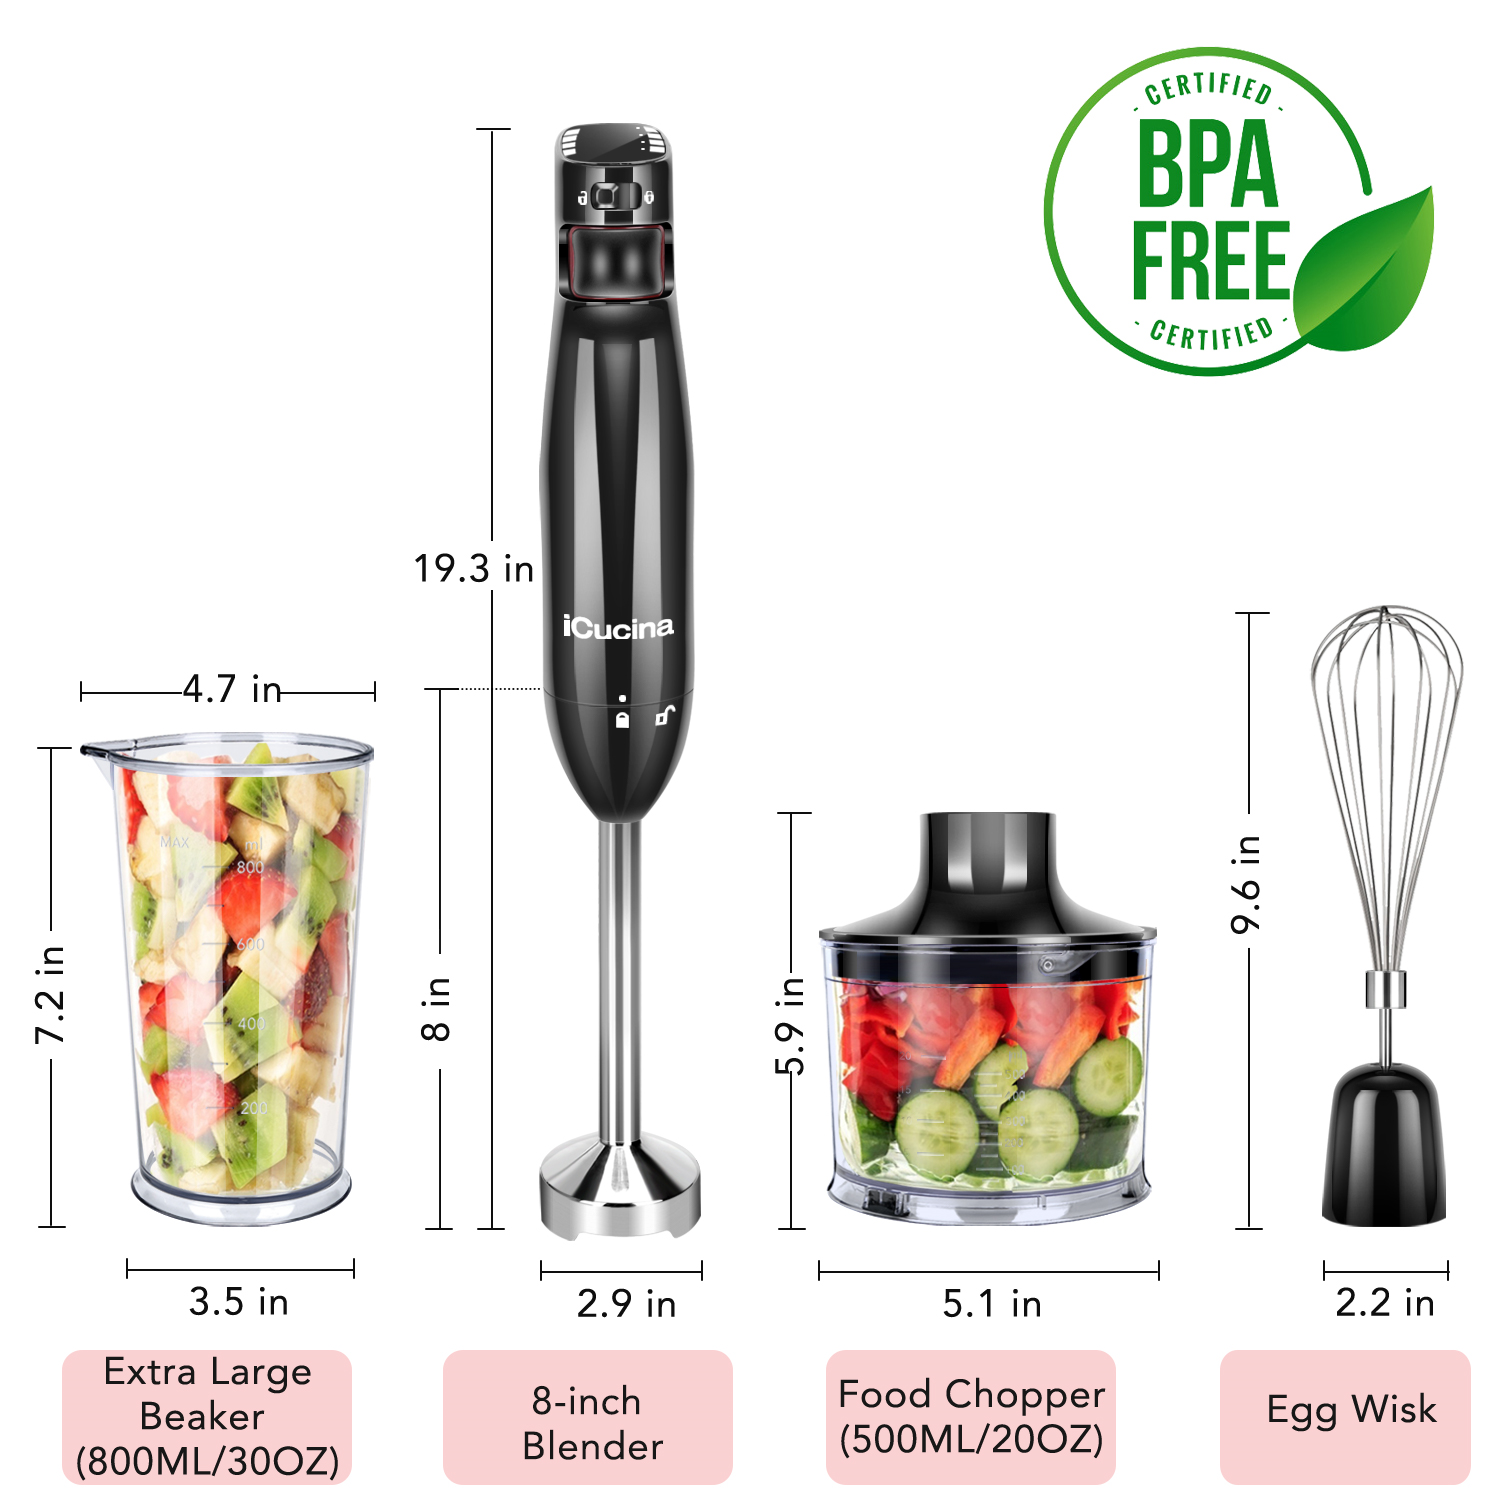 iCucina 3-in-1 Immersion Hand Blender, Powerful 400W DC Motor, Variable Speed Stick Blender with Whisk, Chopper, and Measurin